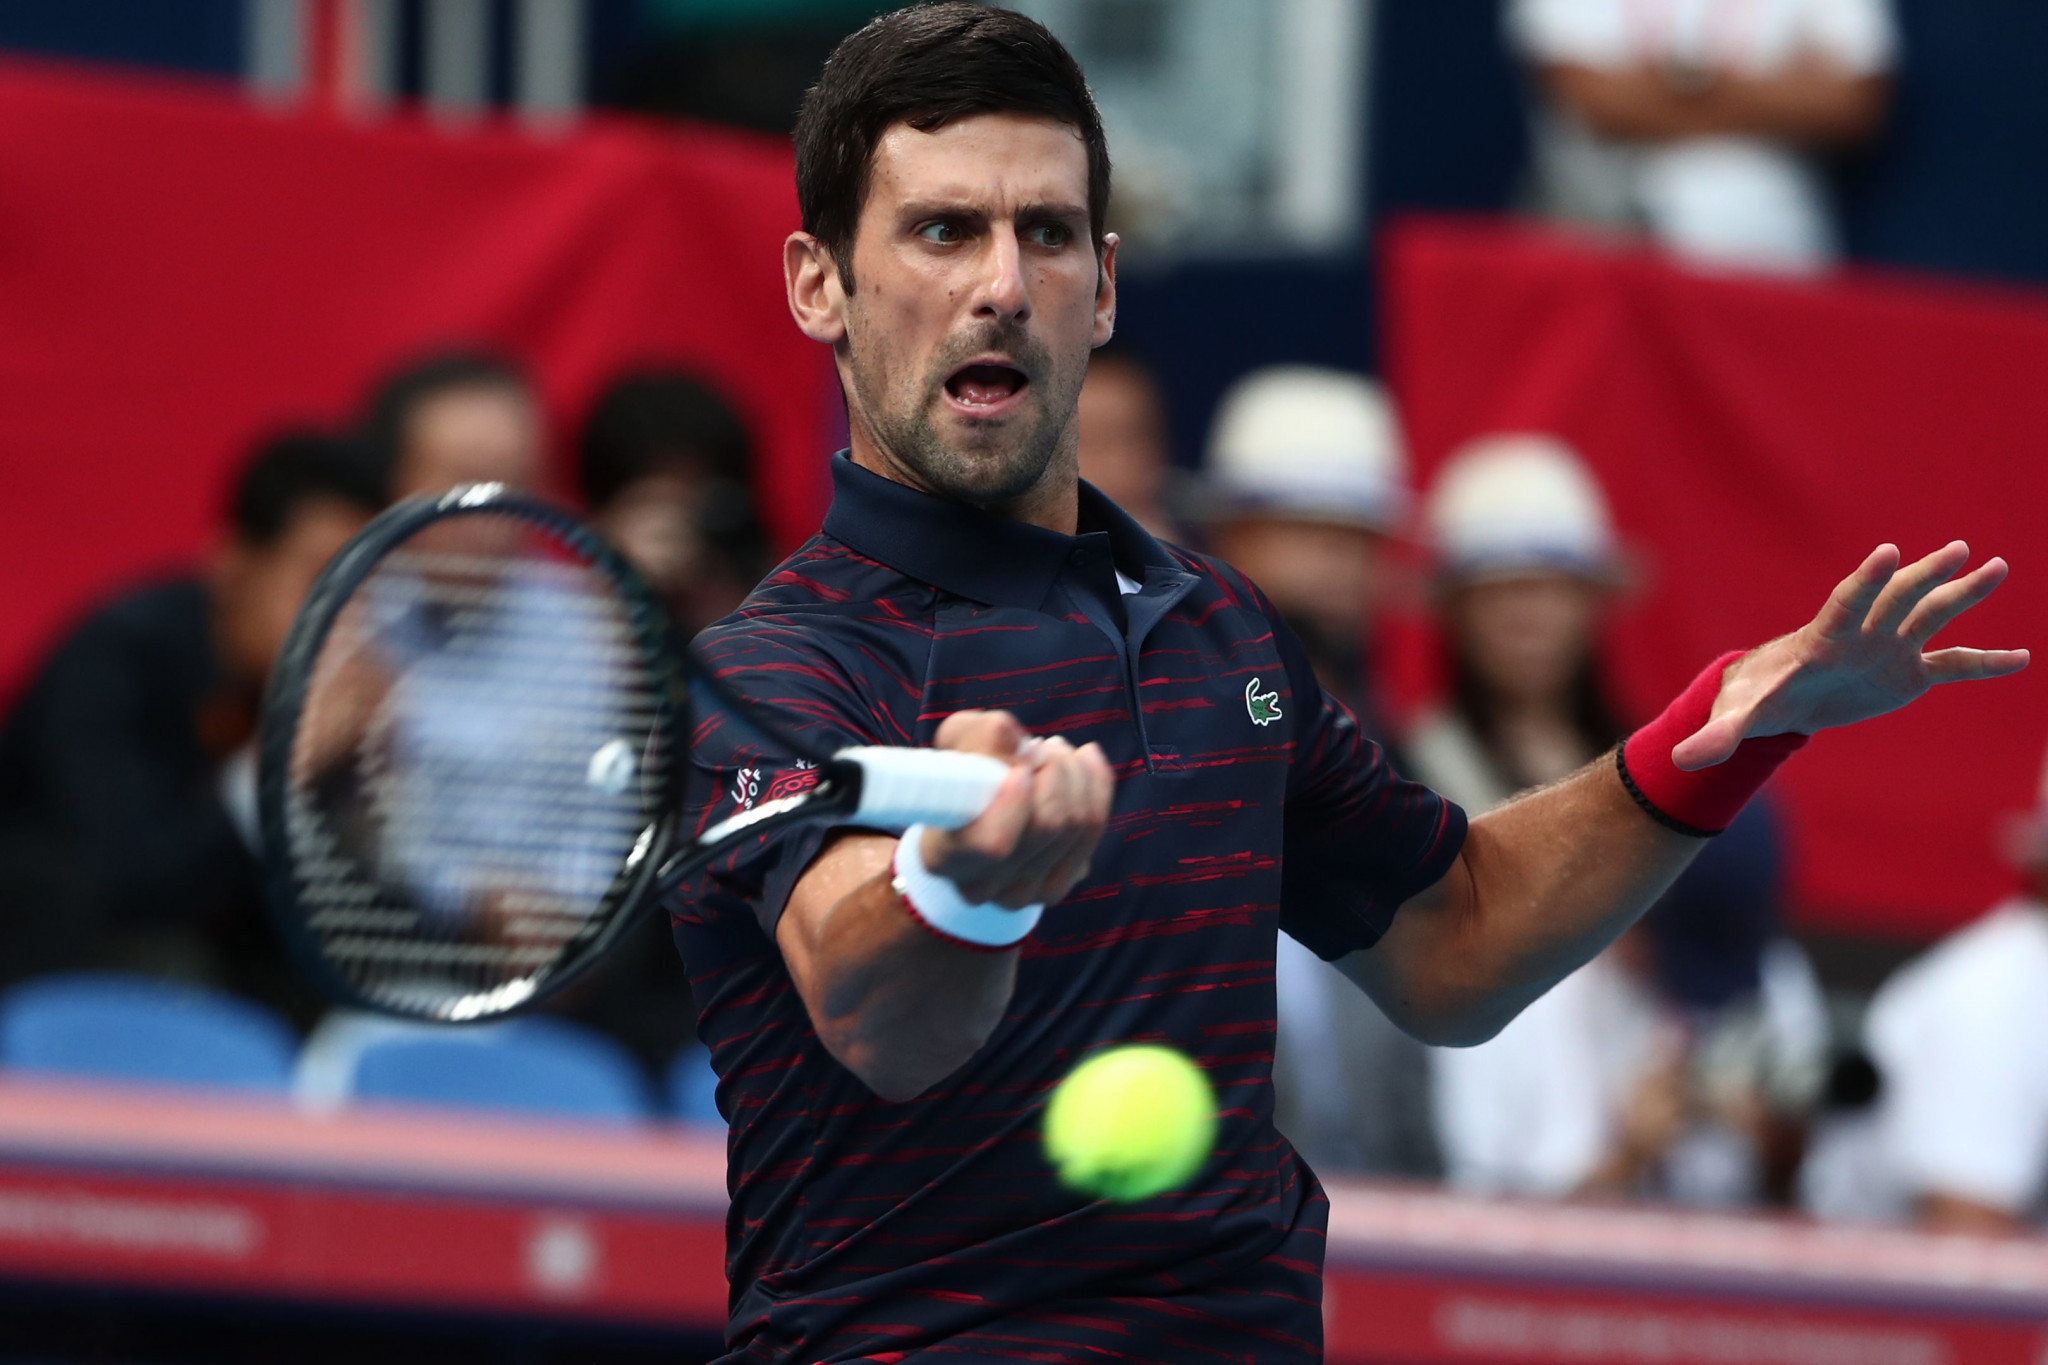 Novak Djokovic of Serbia won 6-3, 6-2 against Australian John Millman to win the ATP Tour event at Ariake Coliseum in Tokyo and pledged to return for the Olympic Games next year ©Getty Images